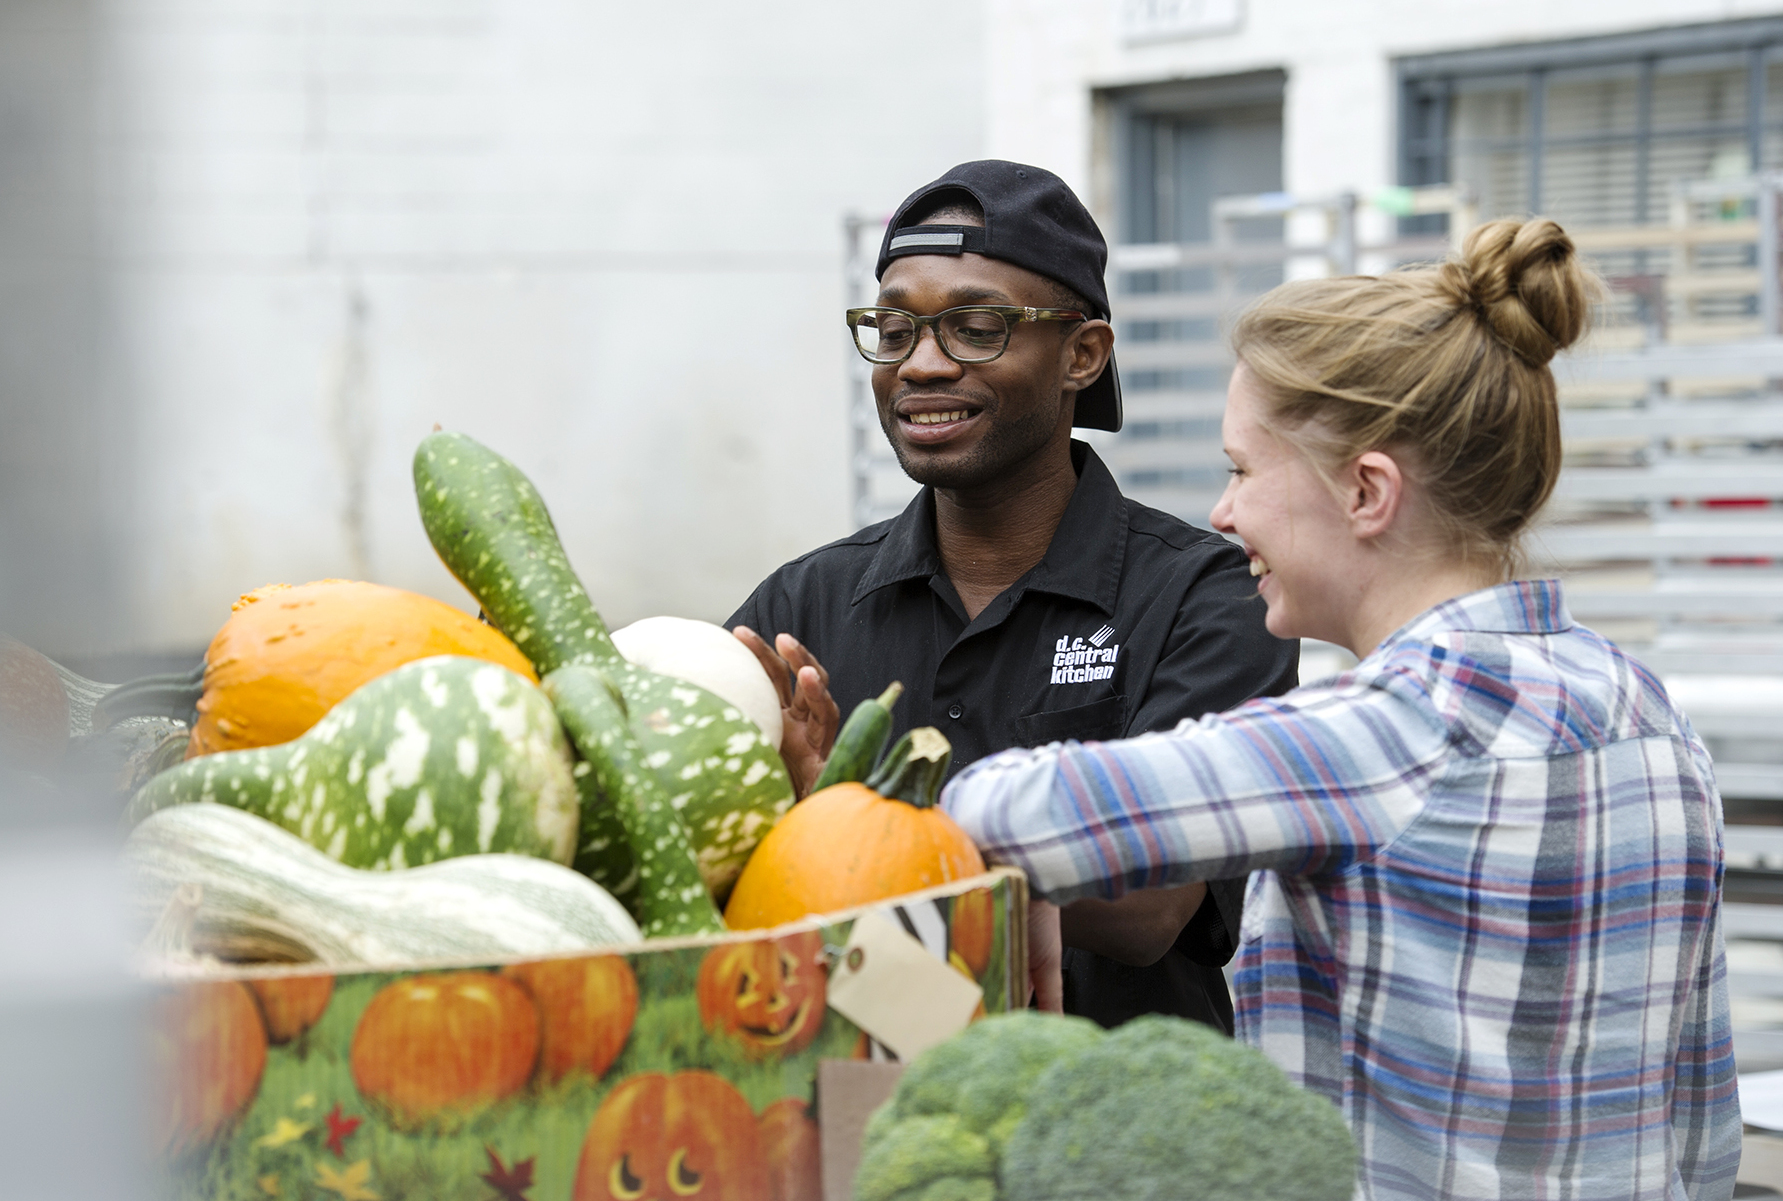 Student volunteers with The Campus Kitchens Project evaluate produce. The initiative gets high-school and college students to scavenge food from cafeterias, grocery stores and farmers' markets, cook it and deliver it to organizations serving low-income people in their communities. Photo: Courtesy of DC Central Kitchen 